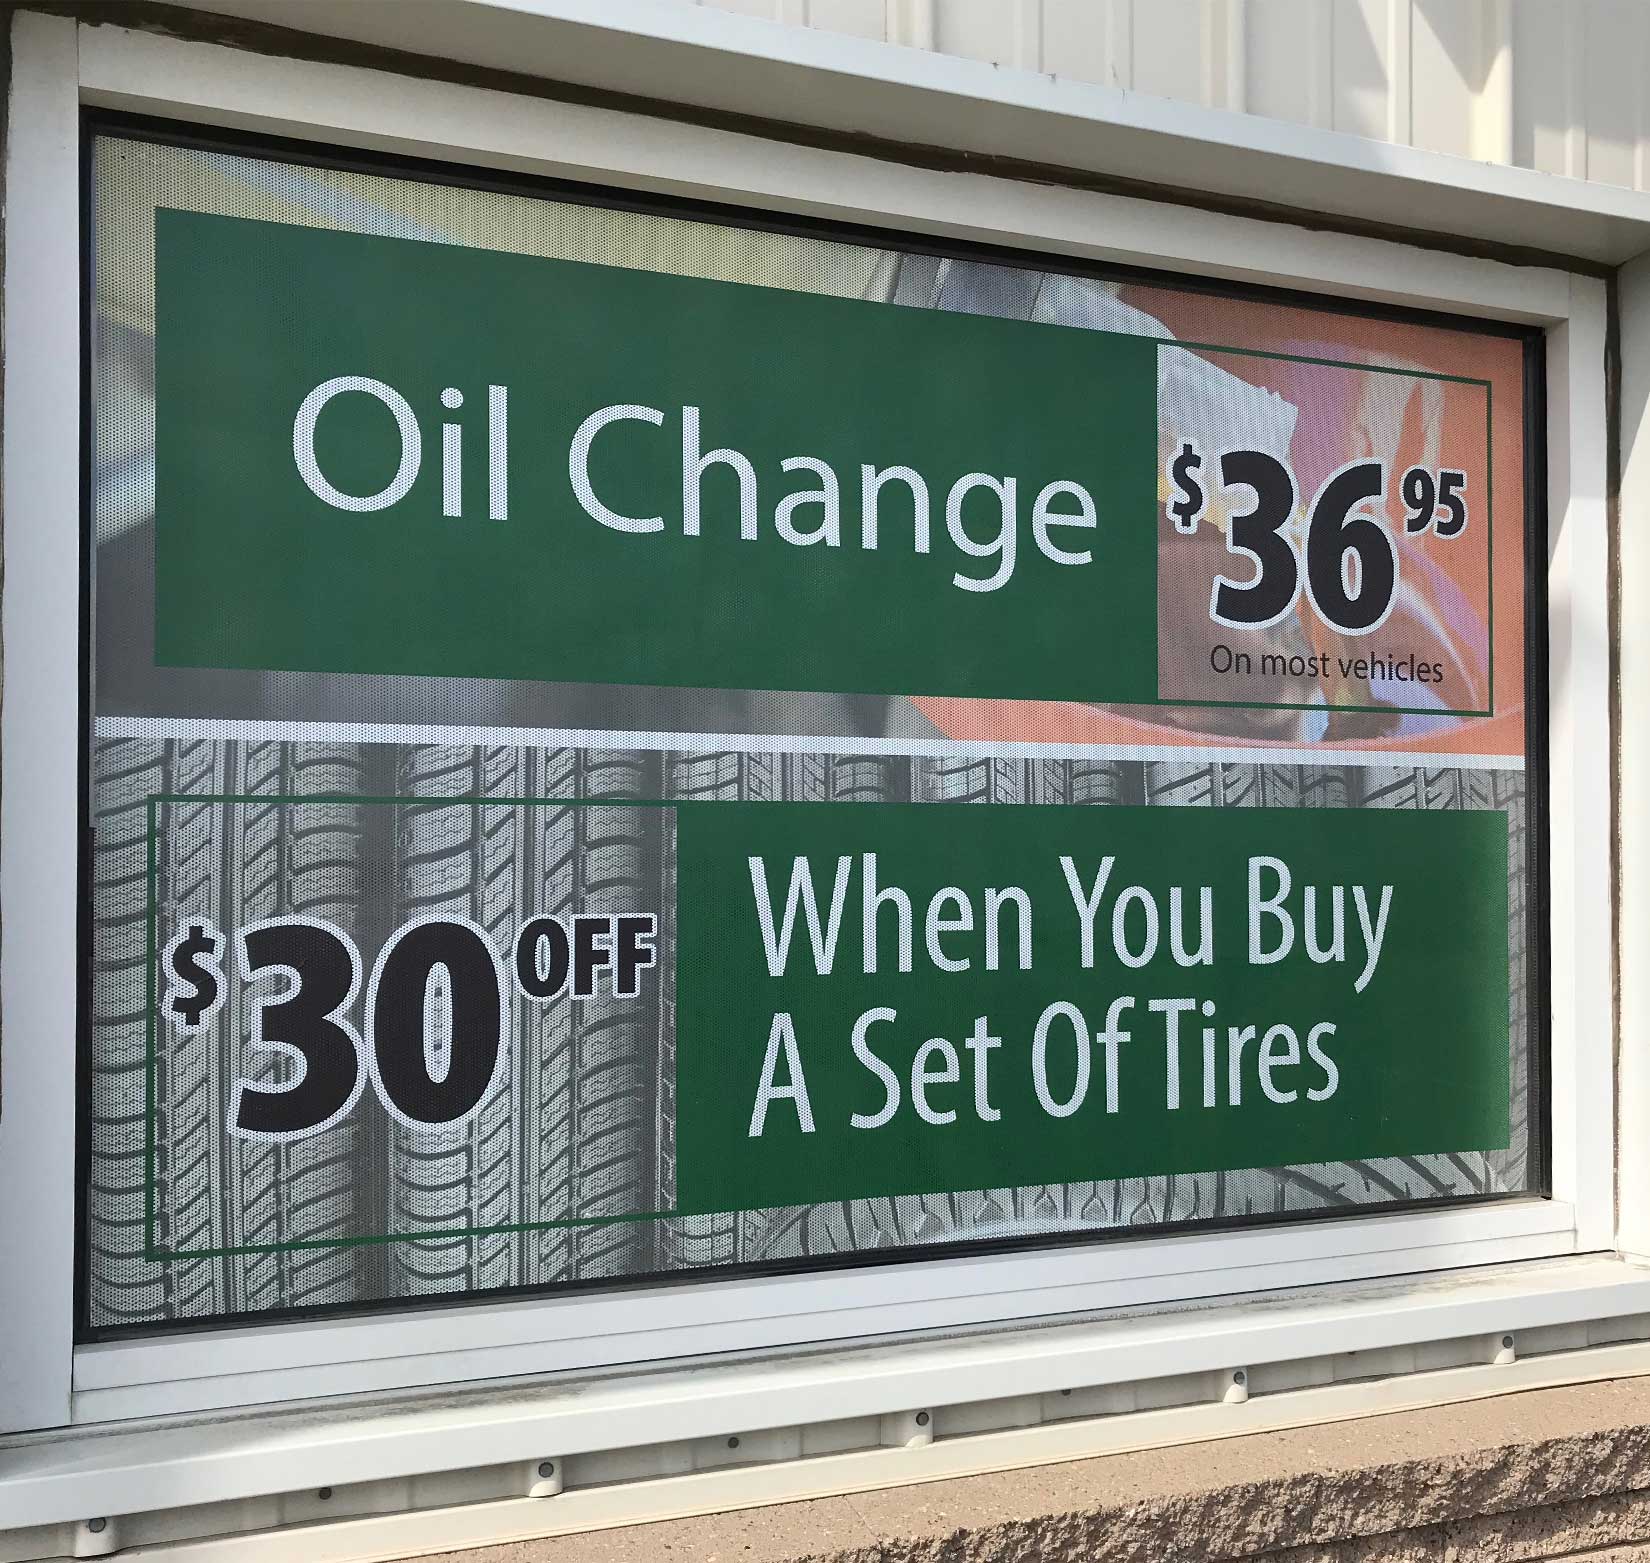 A perforated vinyl window sign displaying the price for an oil change and a discount on tires at Dusterhoft Family Stores.